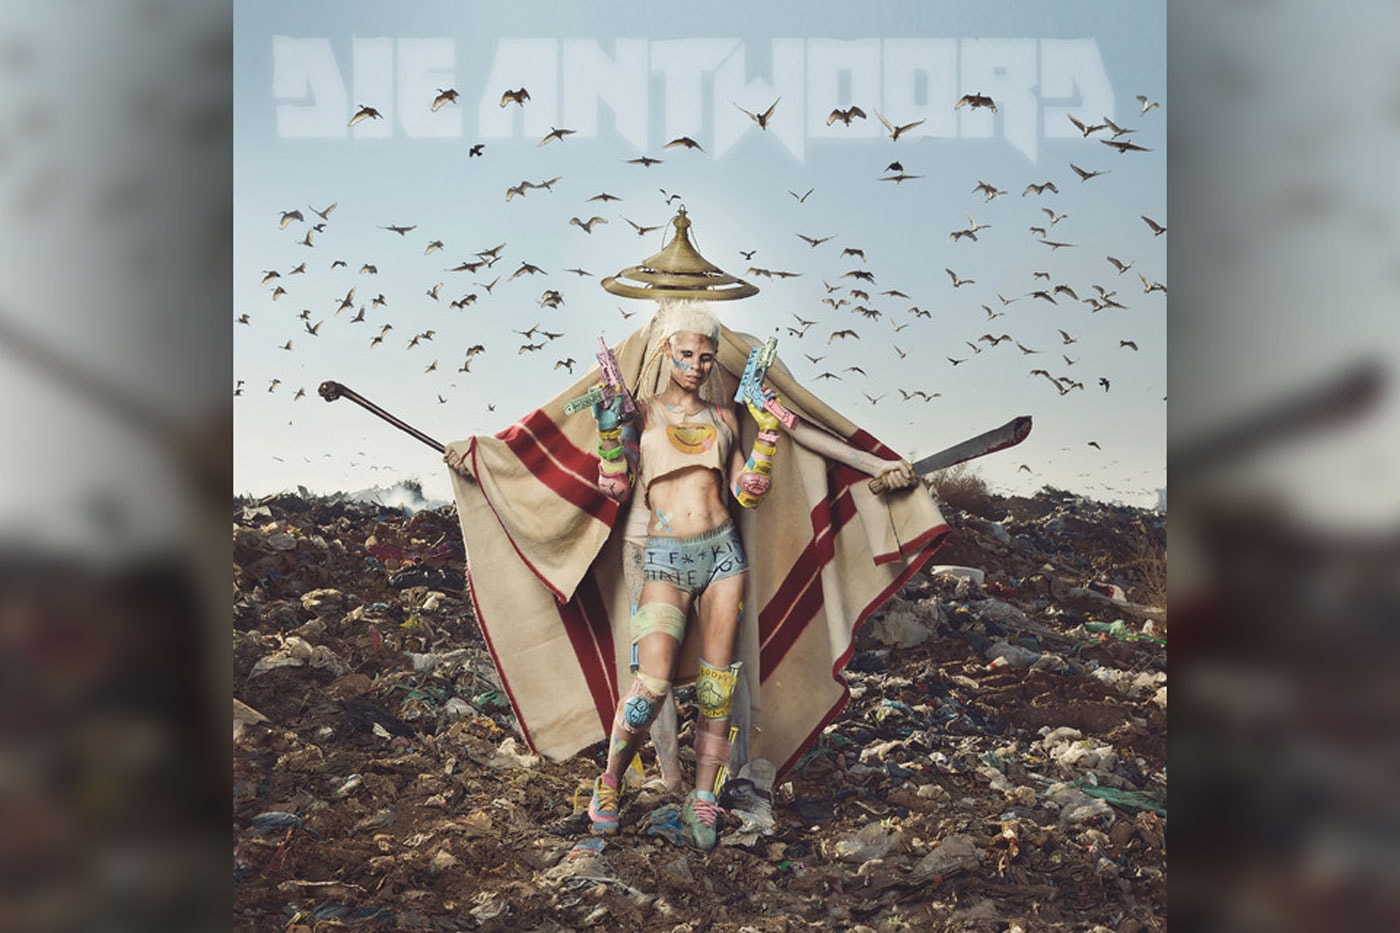 Watch Die Antwoord’s Vibrant New Video For "Banana Brain"